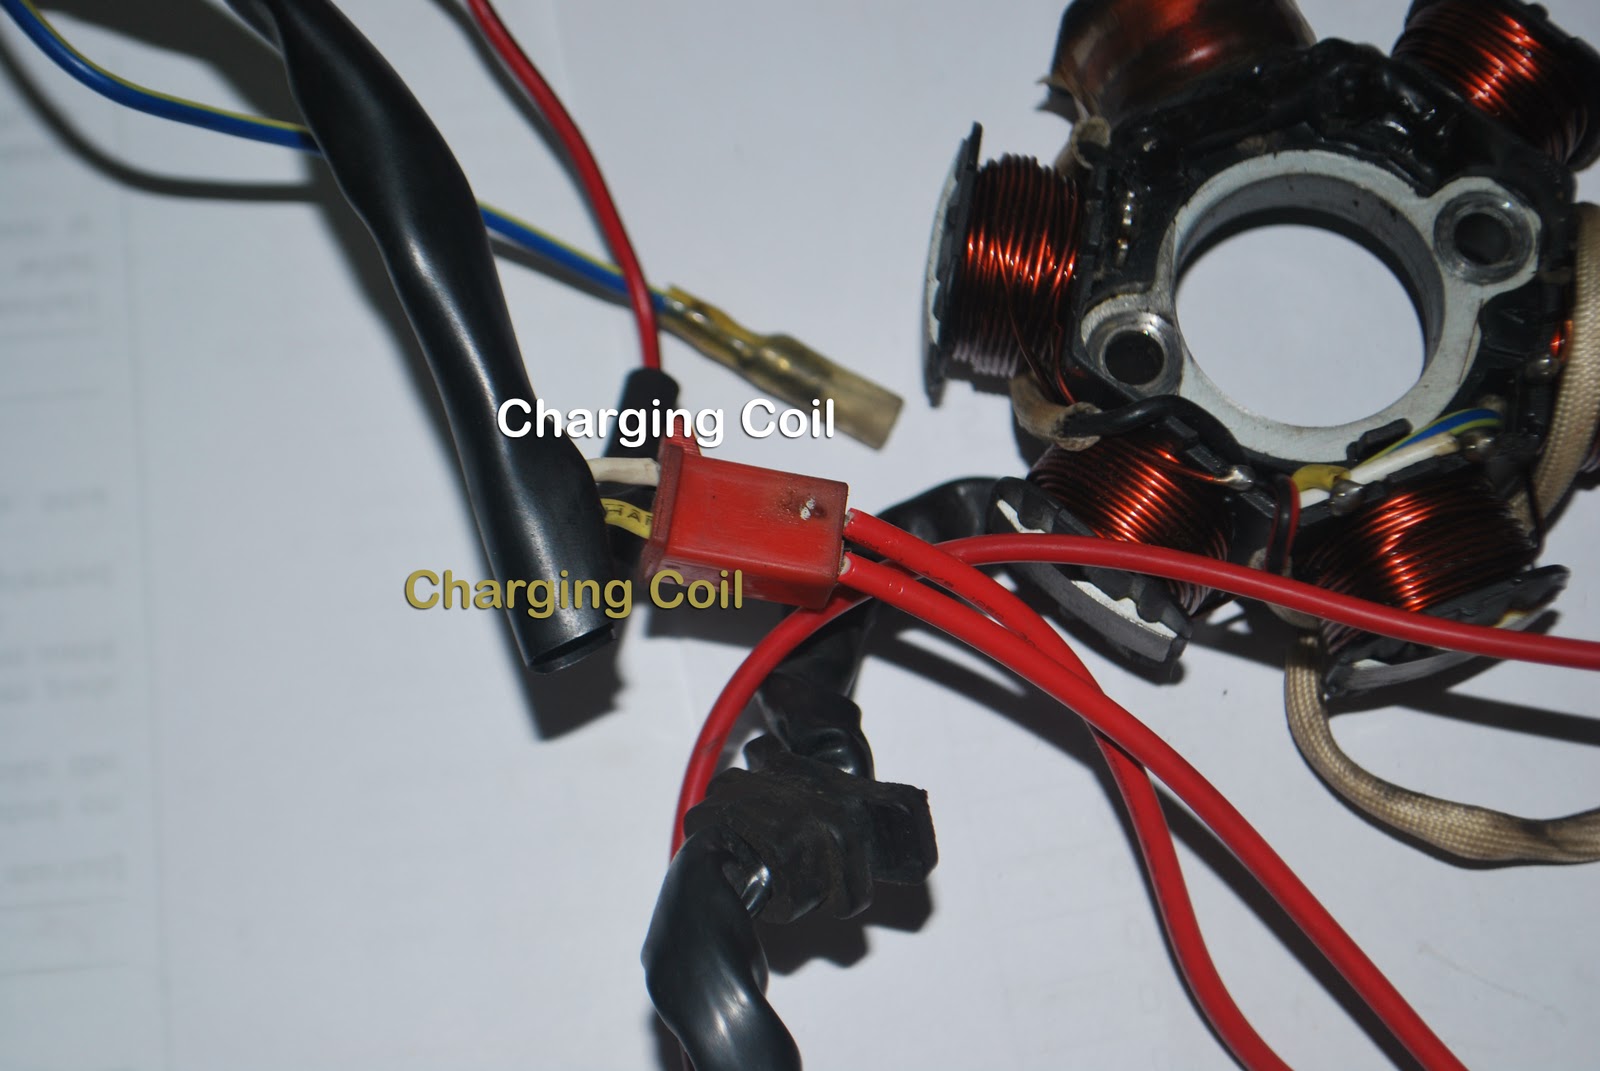 DIY: Fix On Your Own: How to check GY6 Scooter Stator Coil